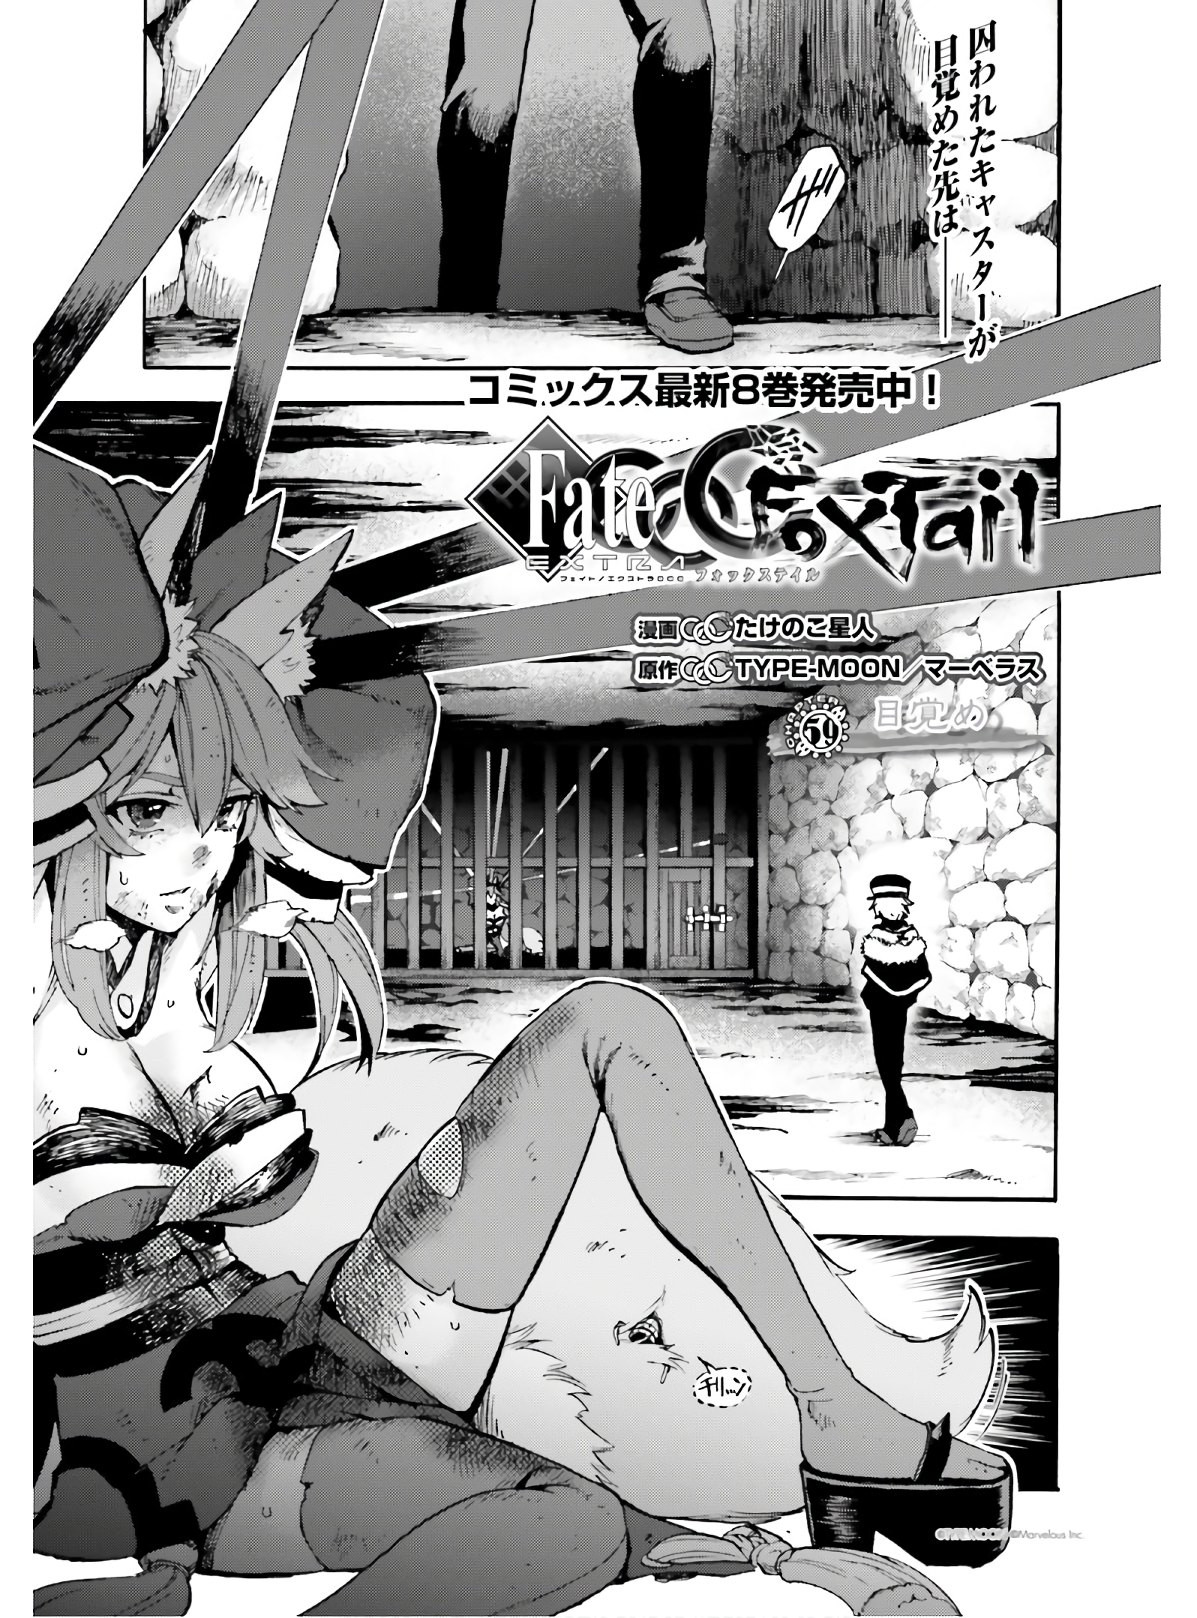 Fate Extra Ccc Fox Tail Chapter 59 Page 1 Raw Sen Manga